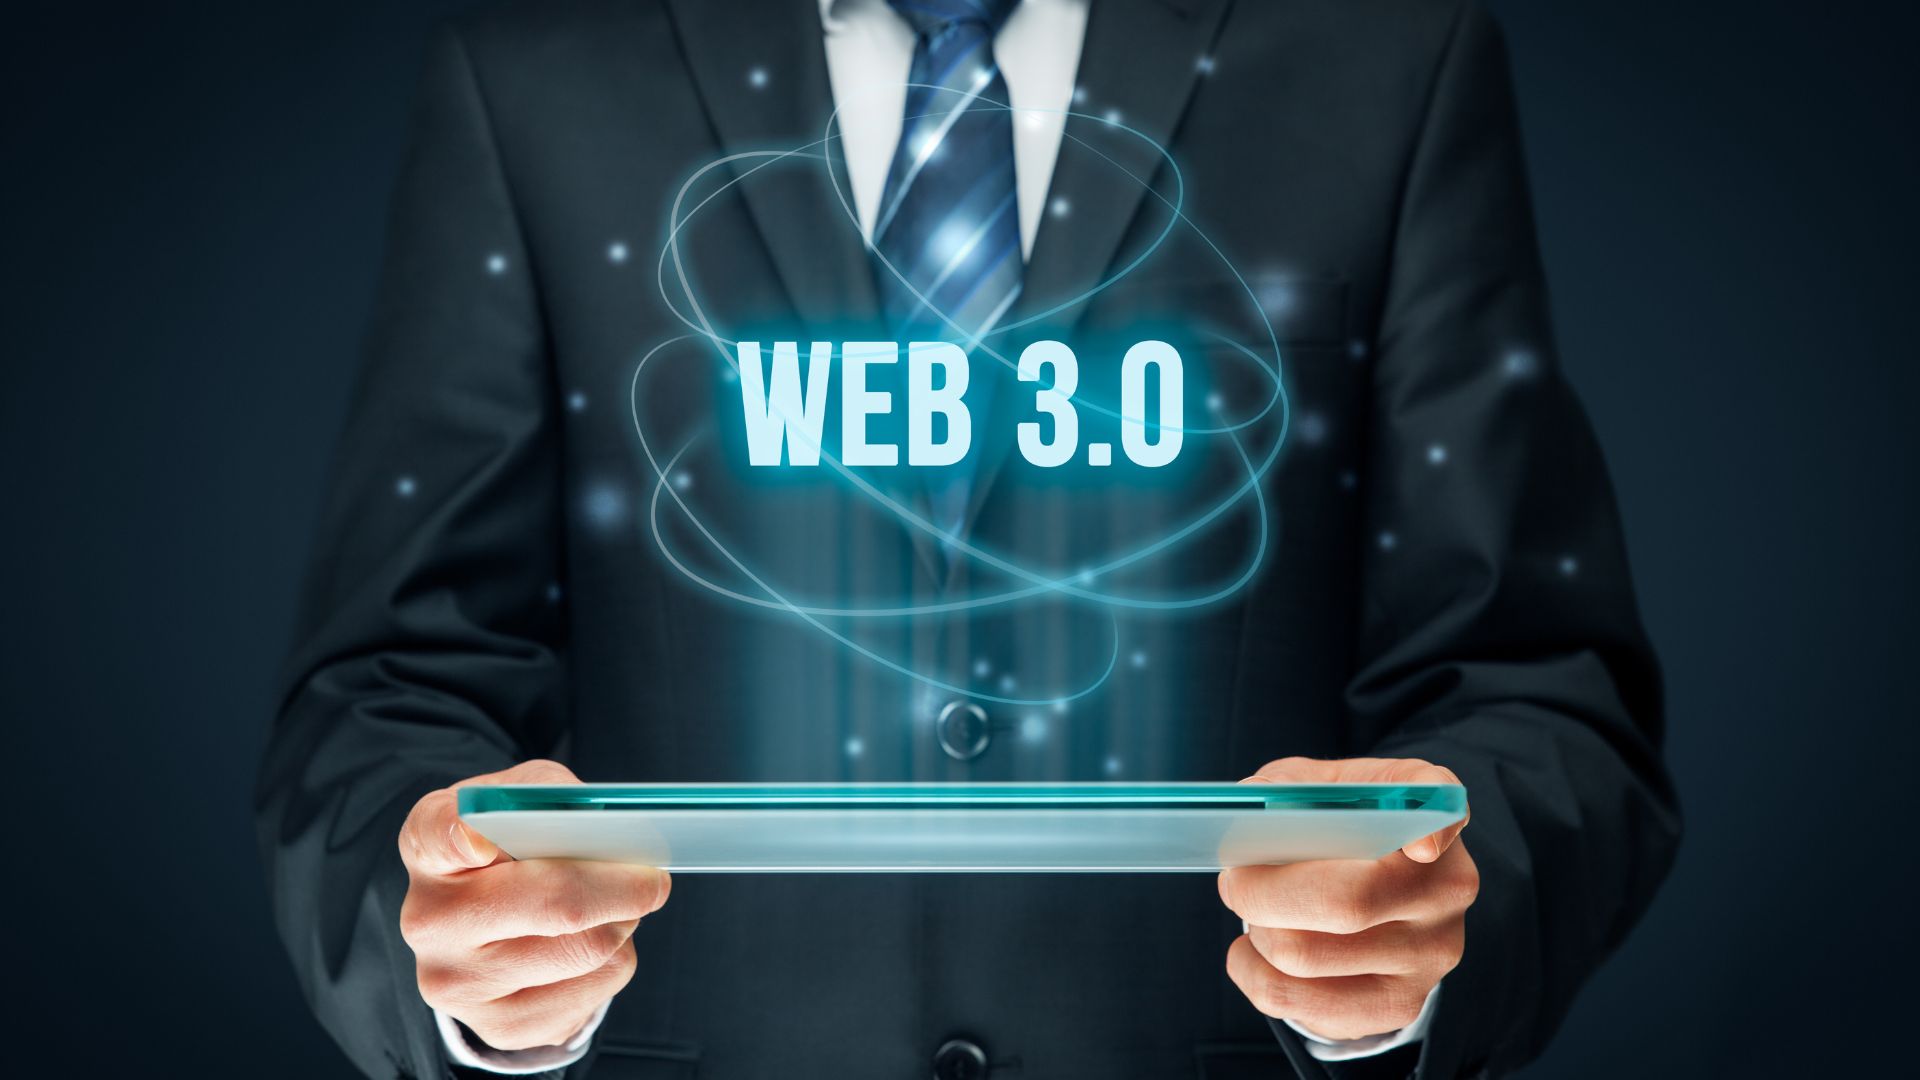 How to Be Safe in Web 3.0